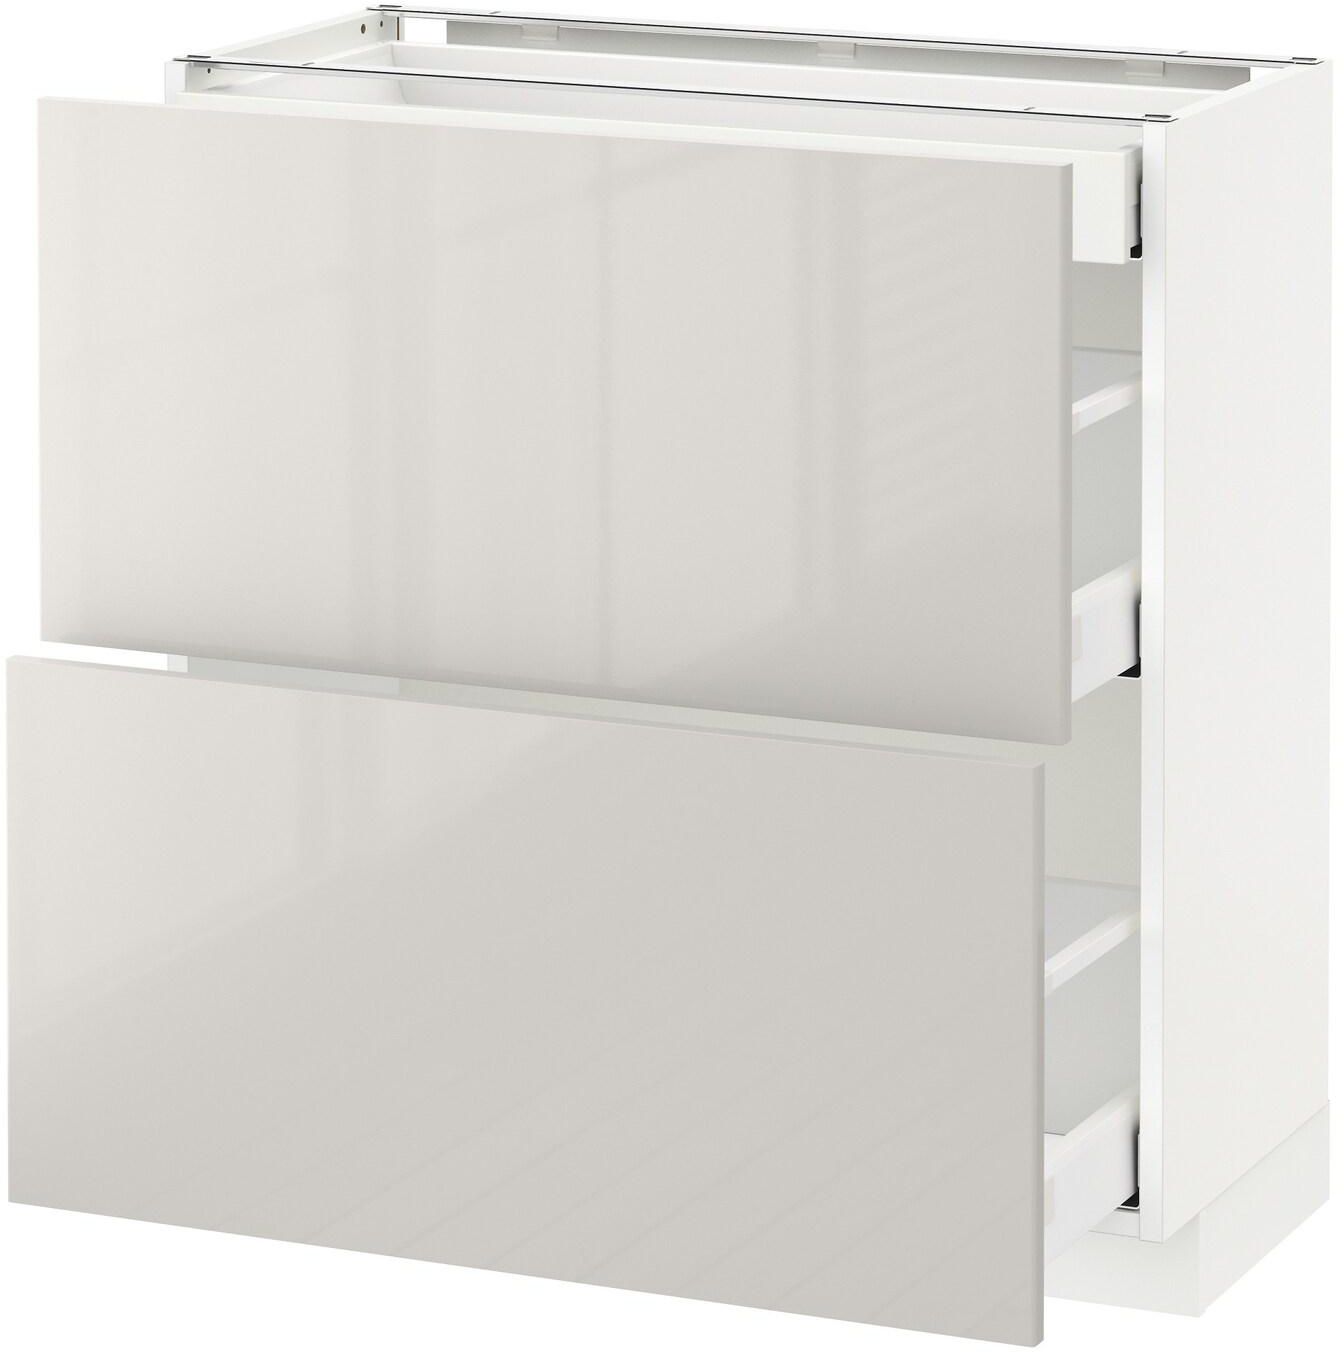 METOD / MAXIMERA Base cab with 2 fronts/3 drawers - white/Ringhult light grey 80x37 cm